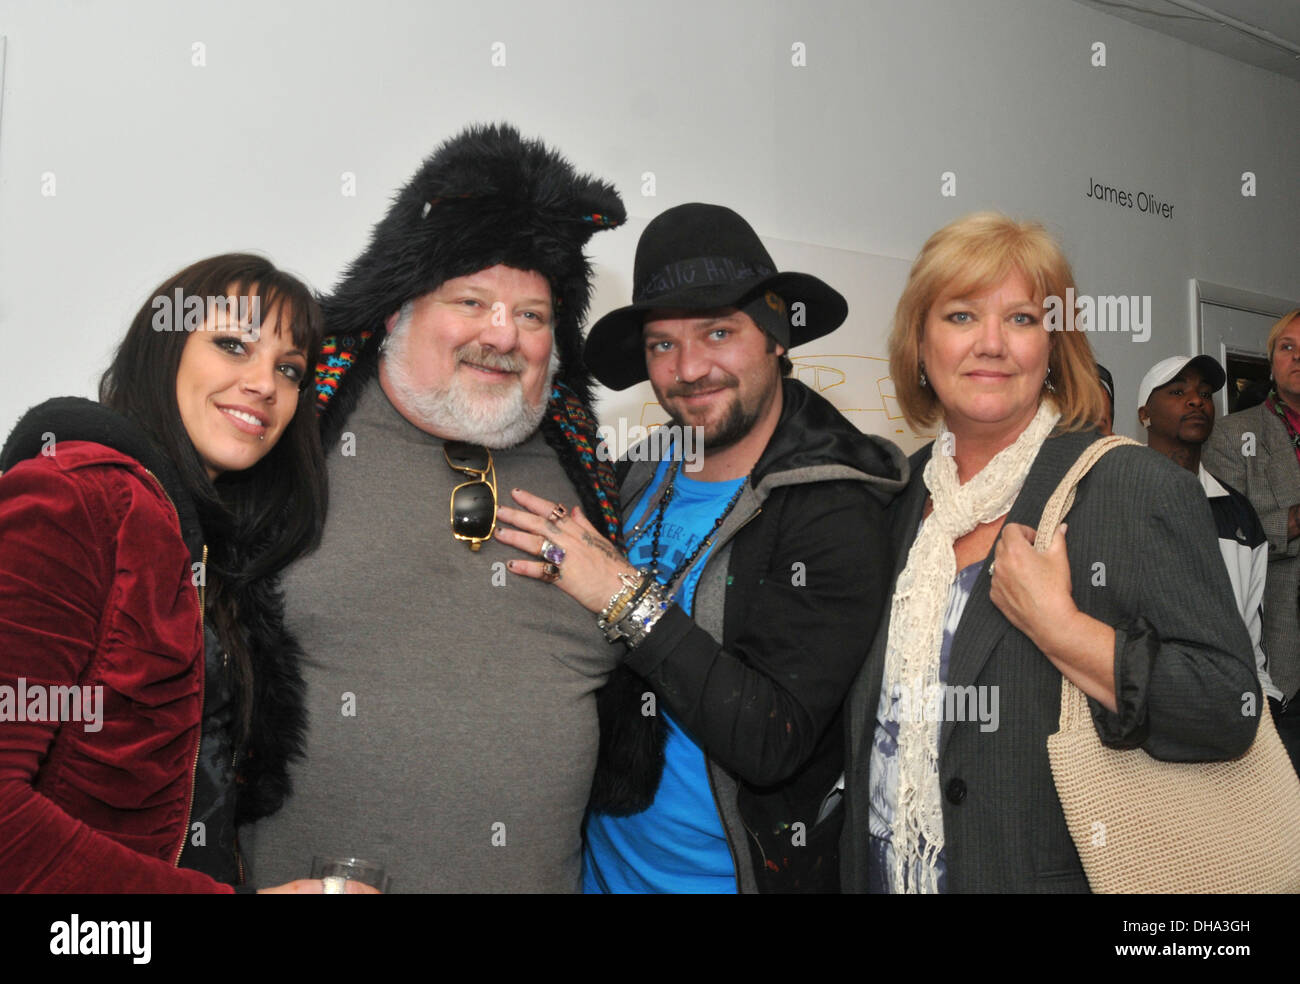 Nikki B Phil Margera Bam Margera and April Margera Bam Margera & Friends art exhibition opening at James Oliver Gallery Stock Photo